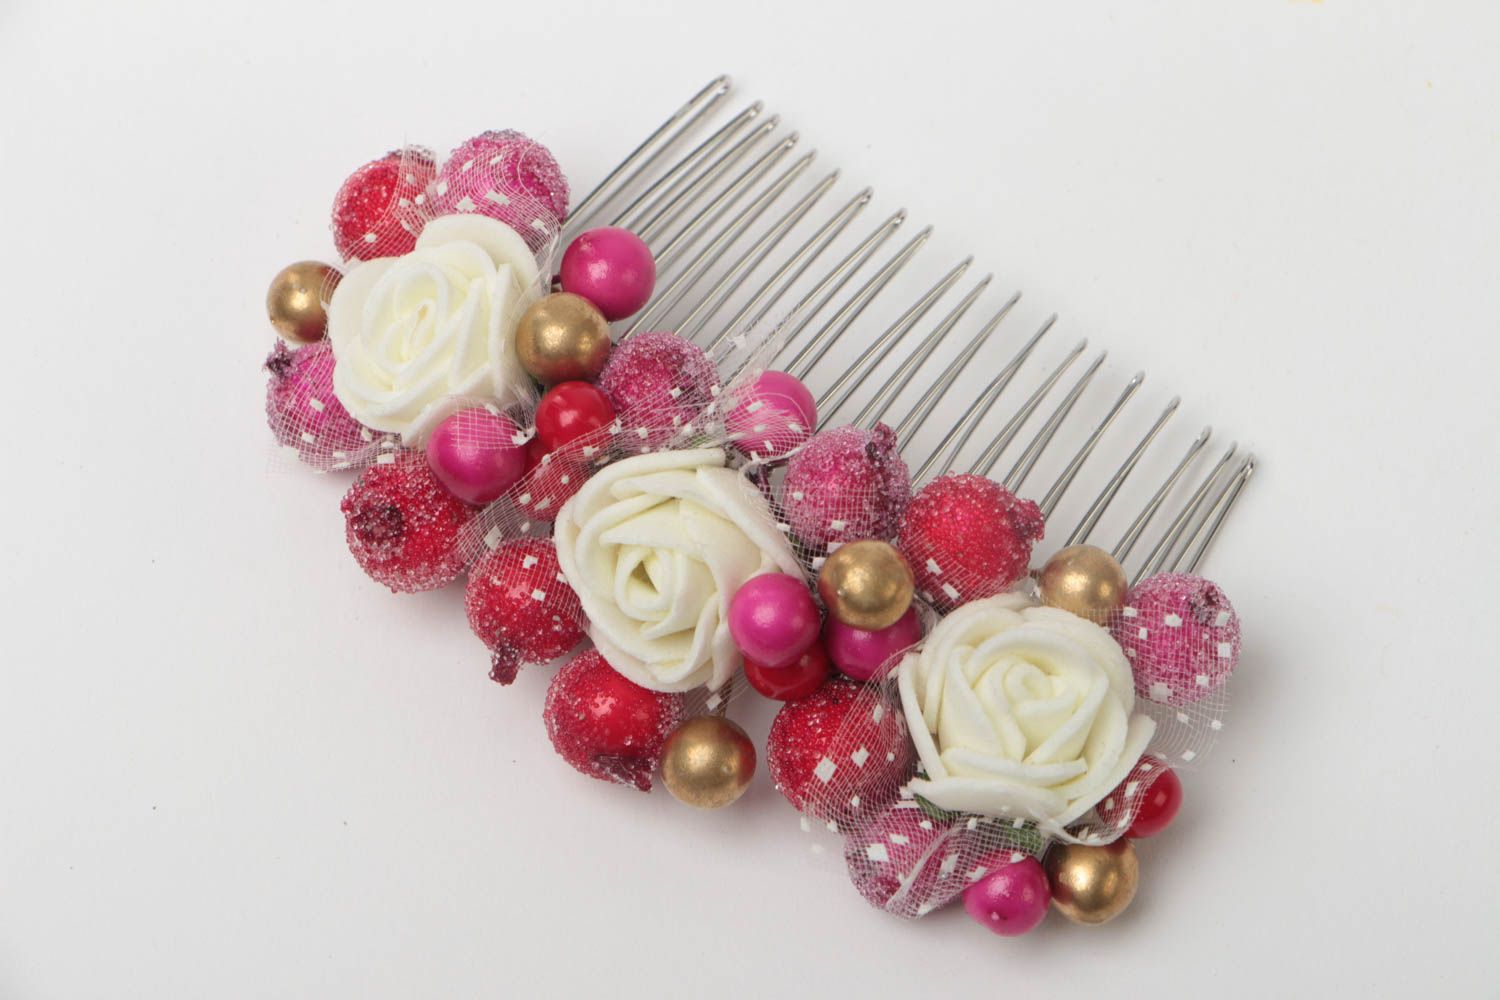 Handmade metal decorative hair comb with artificial colorful berries and flowers photo 2